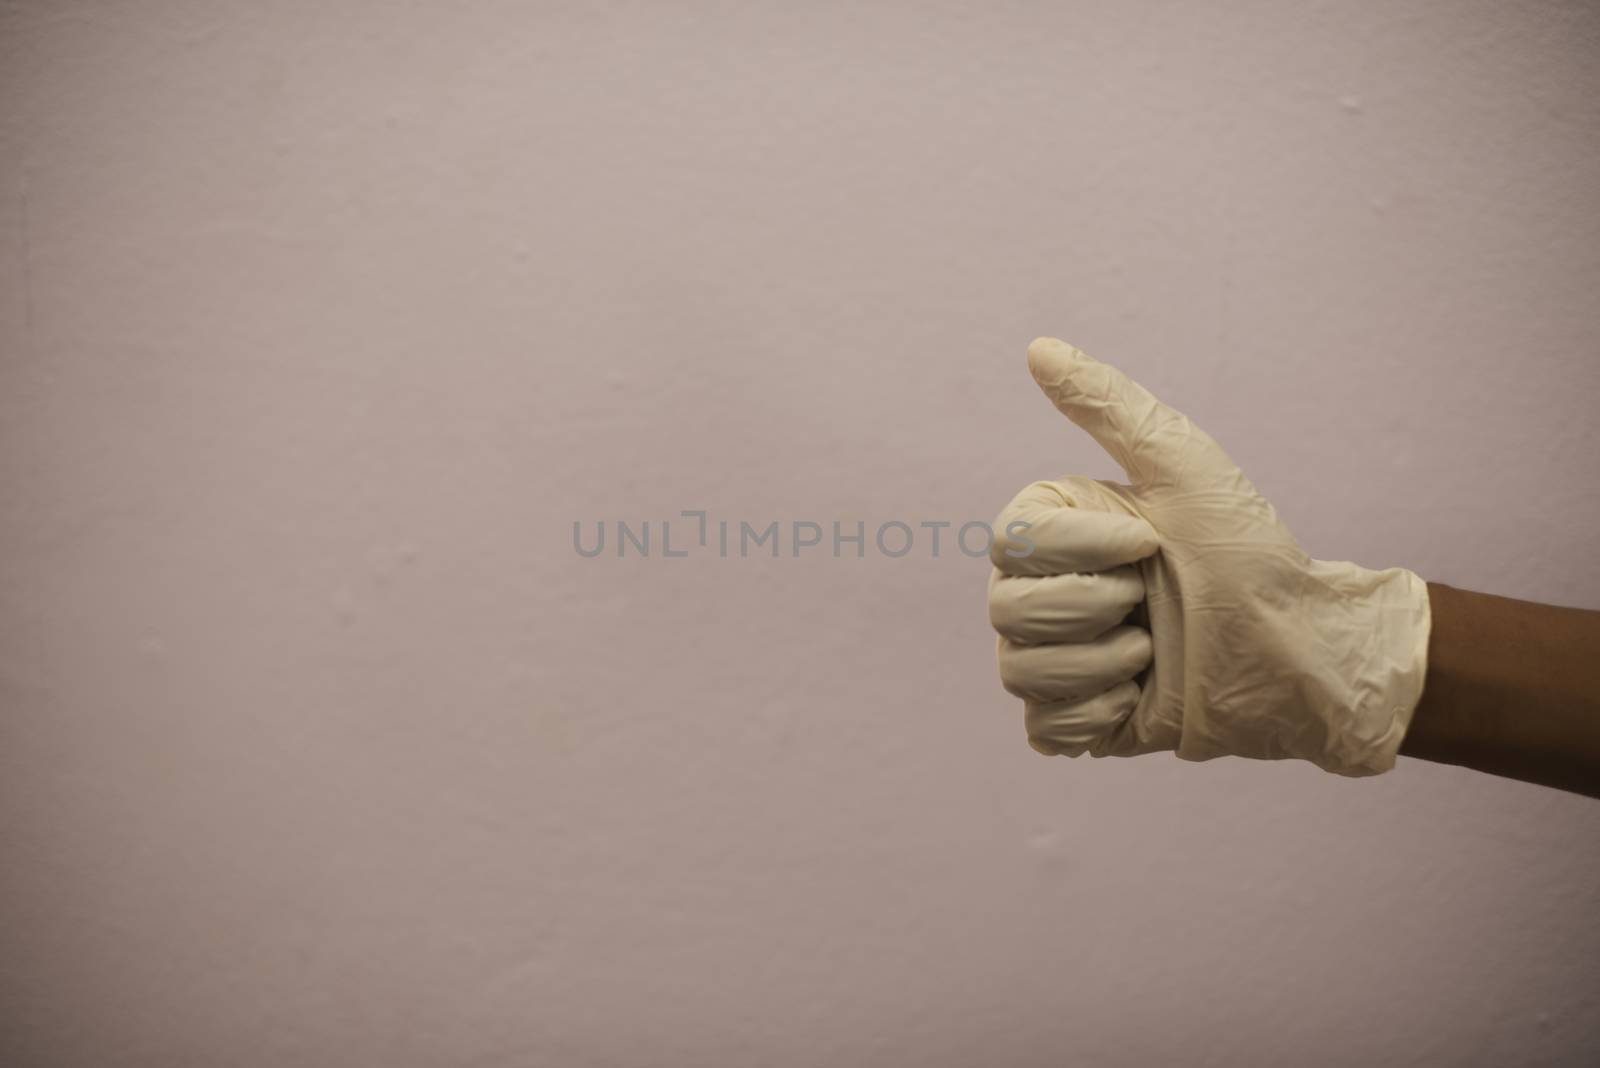 Hand with surgical glove showing thumbs up gesture